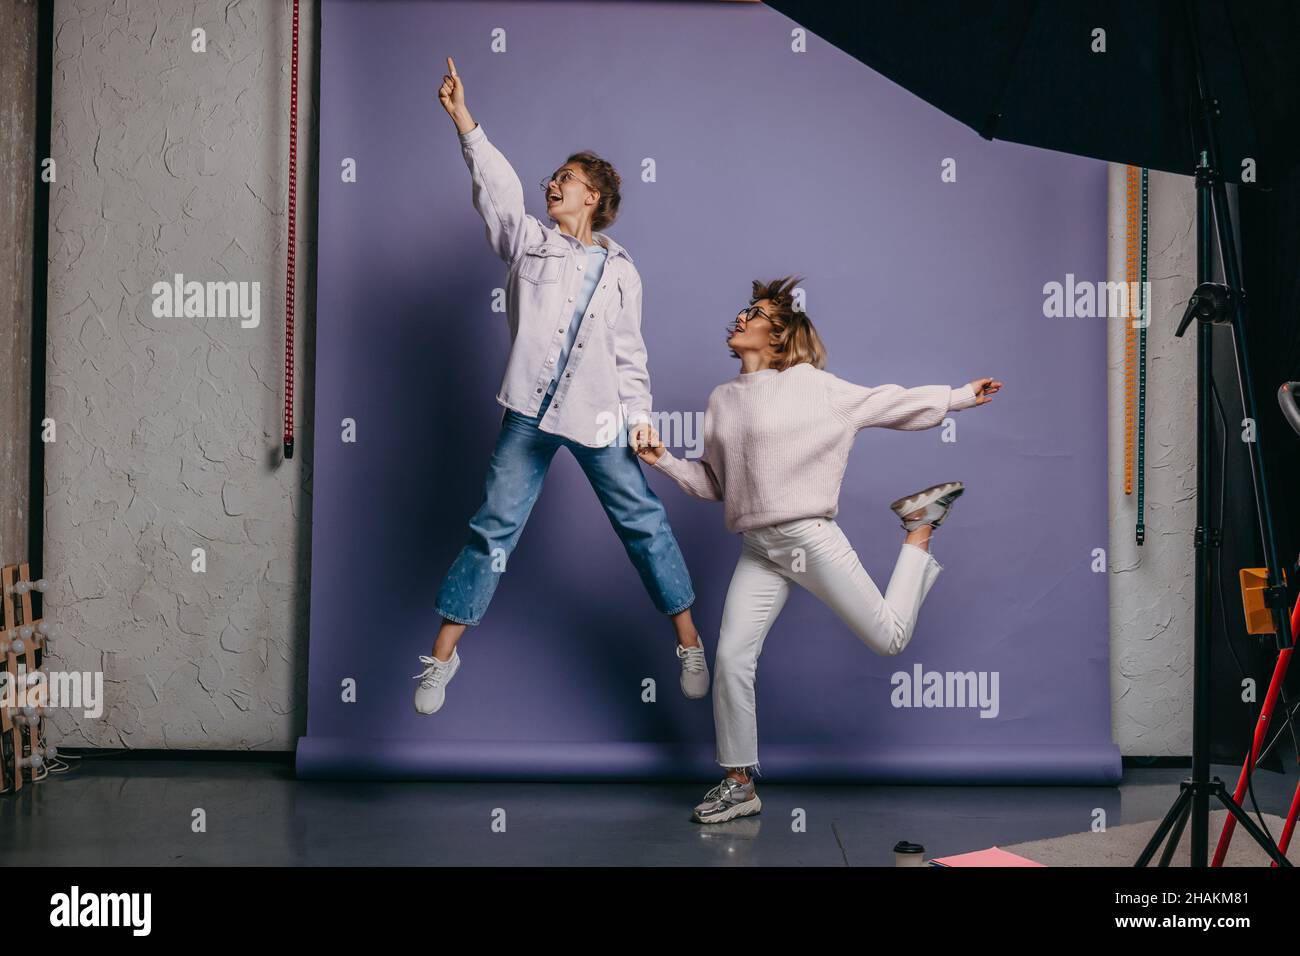 Two women in casual wears jumping on isolated purple background. Hand in hand. Friendship. Stock Photo